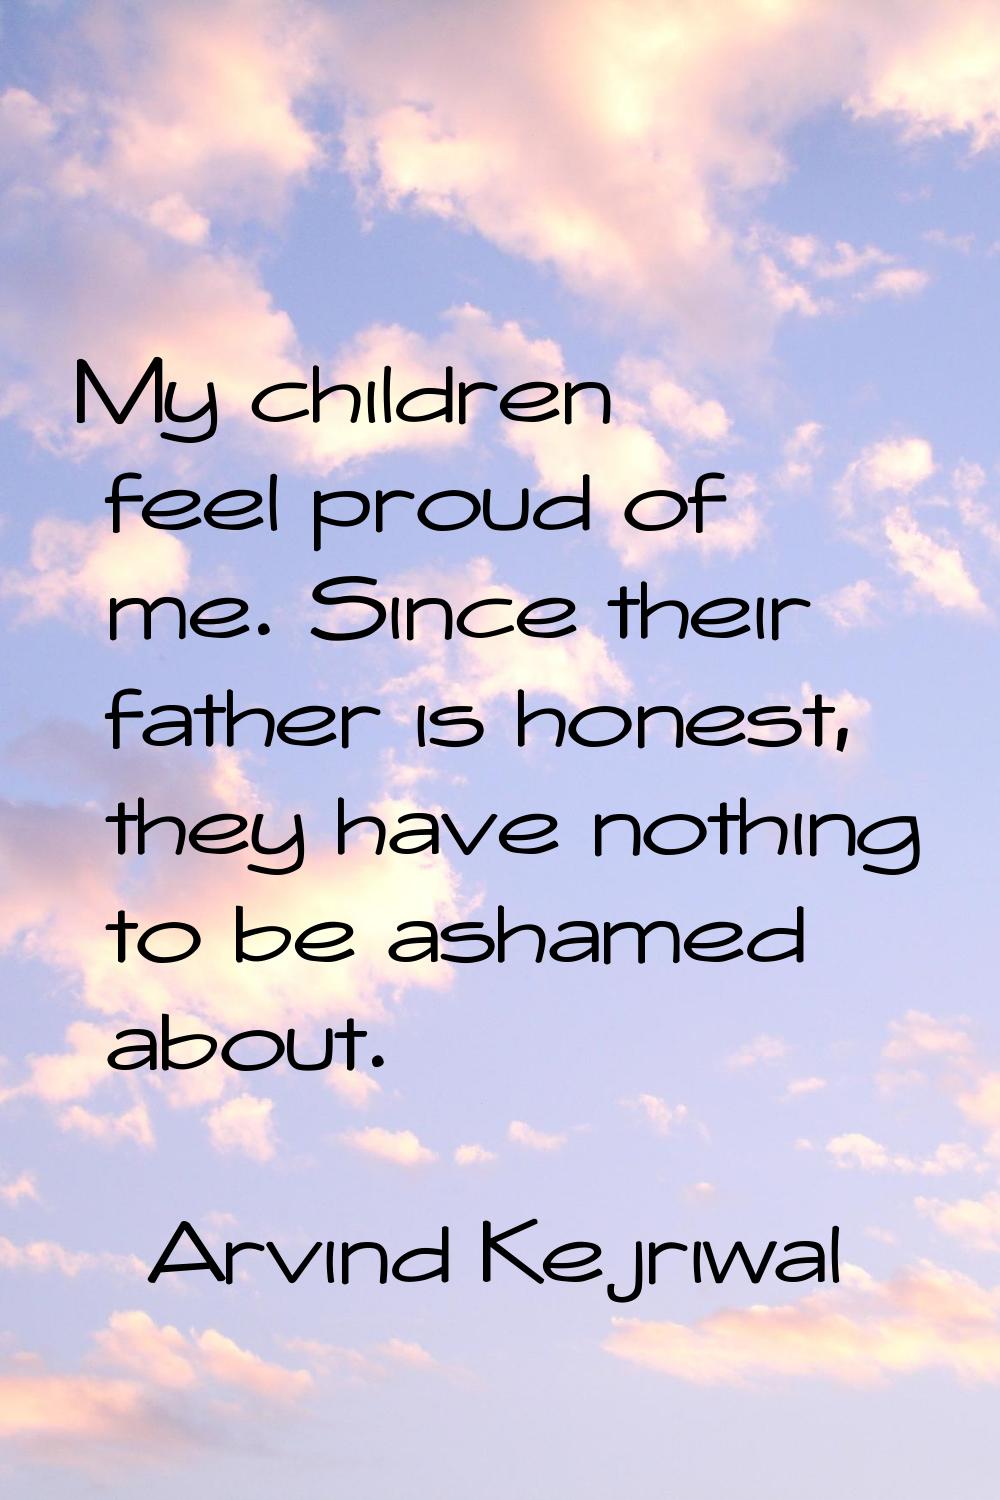 My children feel proud of me. Since their father is honest, they have nothing to be ashamed about.